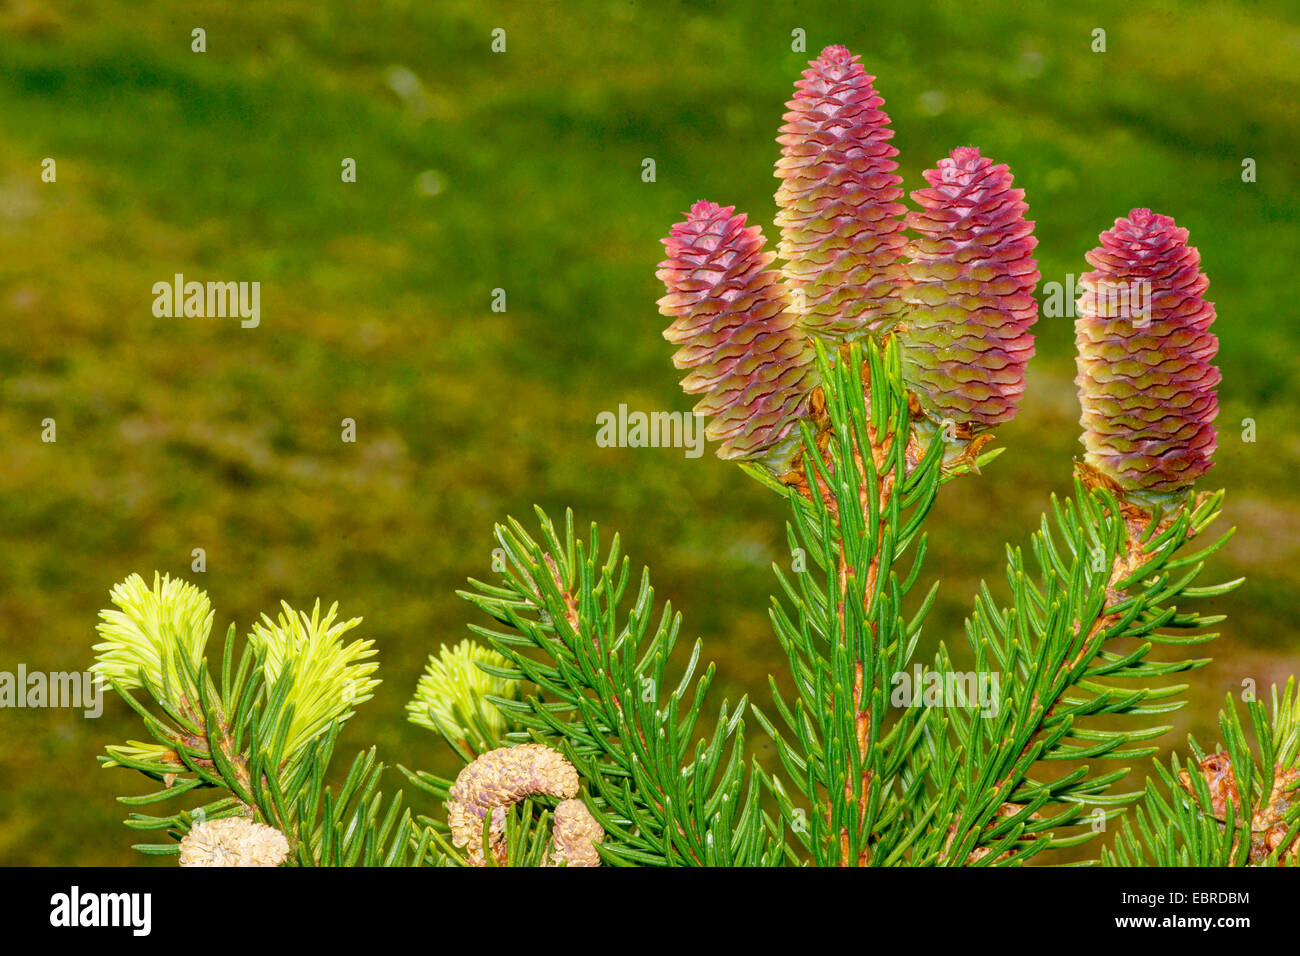 Norway spruce (Picea abies), branch with young cones, Germany, North Rhine-Westphalia, Hochsauerland Stock Photo